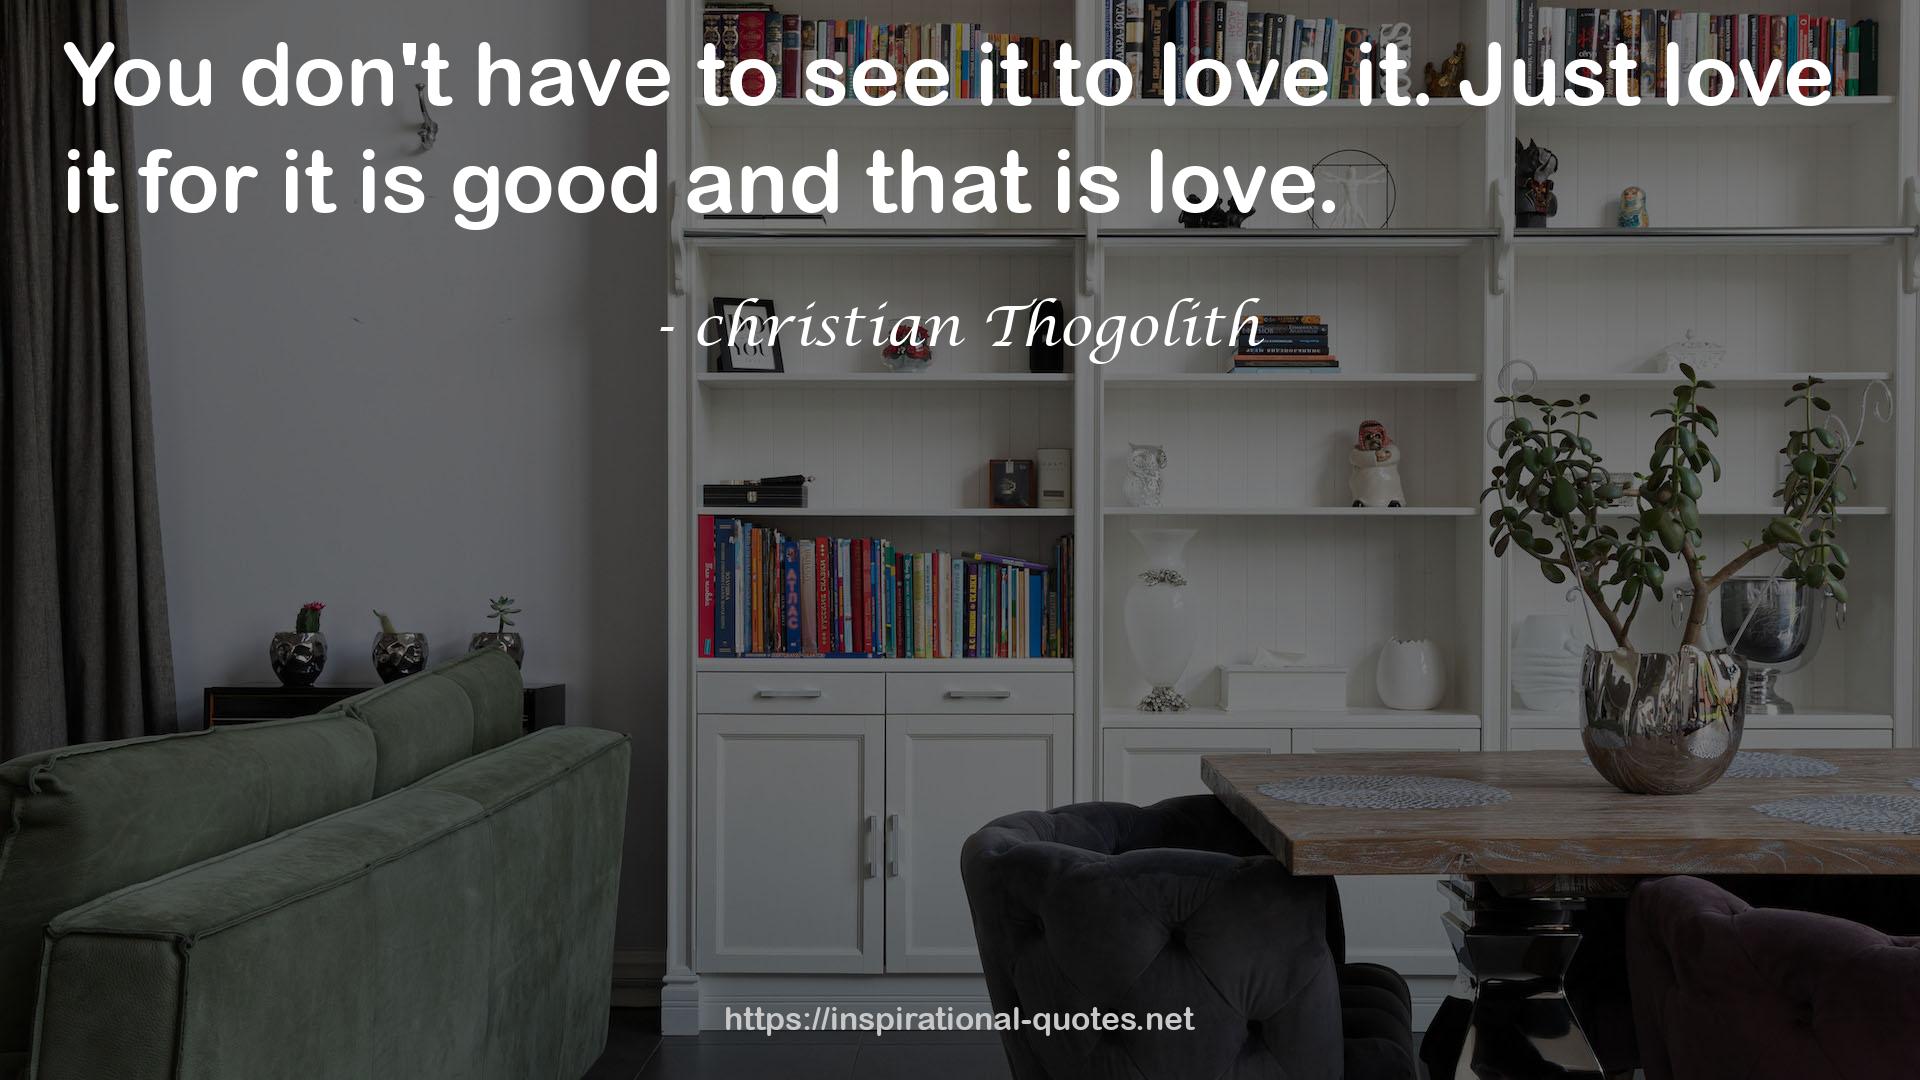 christian Thogolith QUOTES